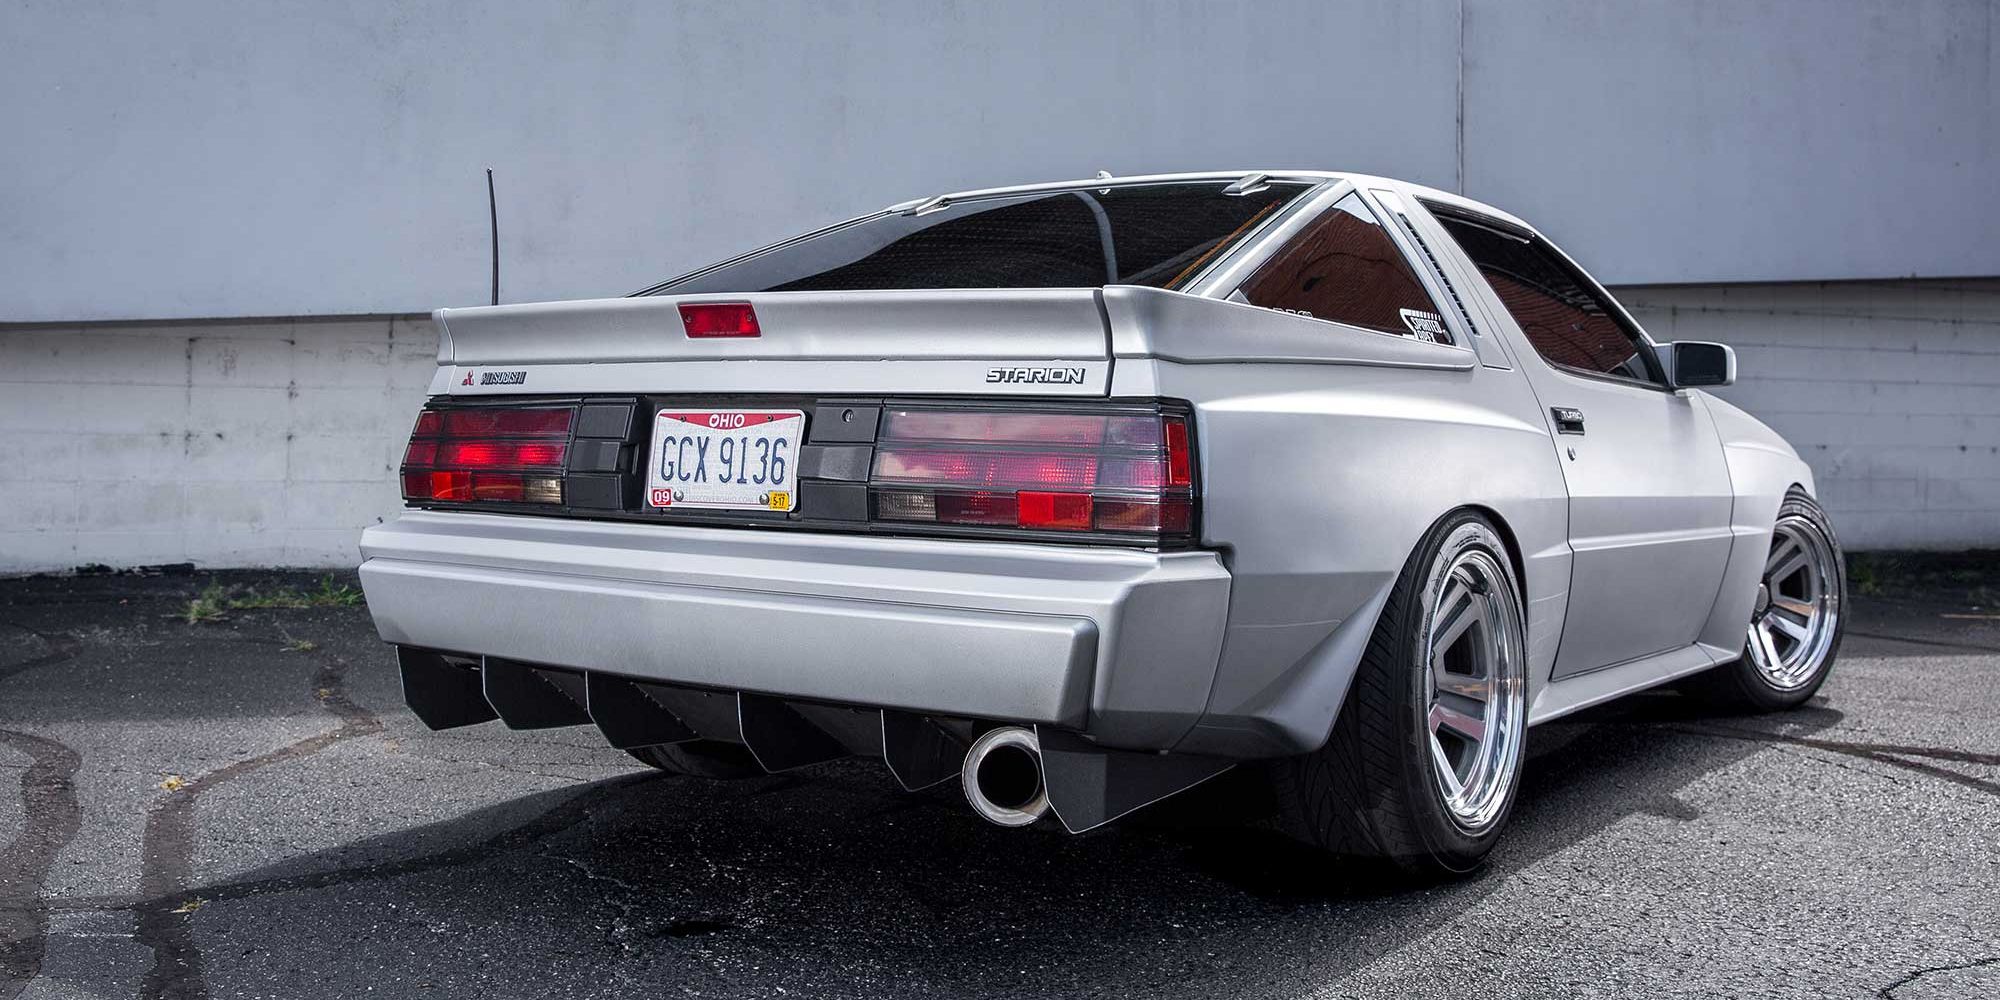 The rear of the Starion (widebody)